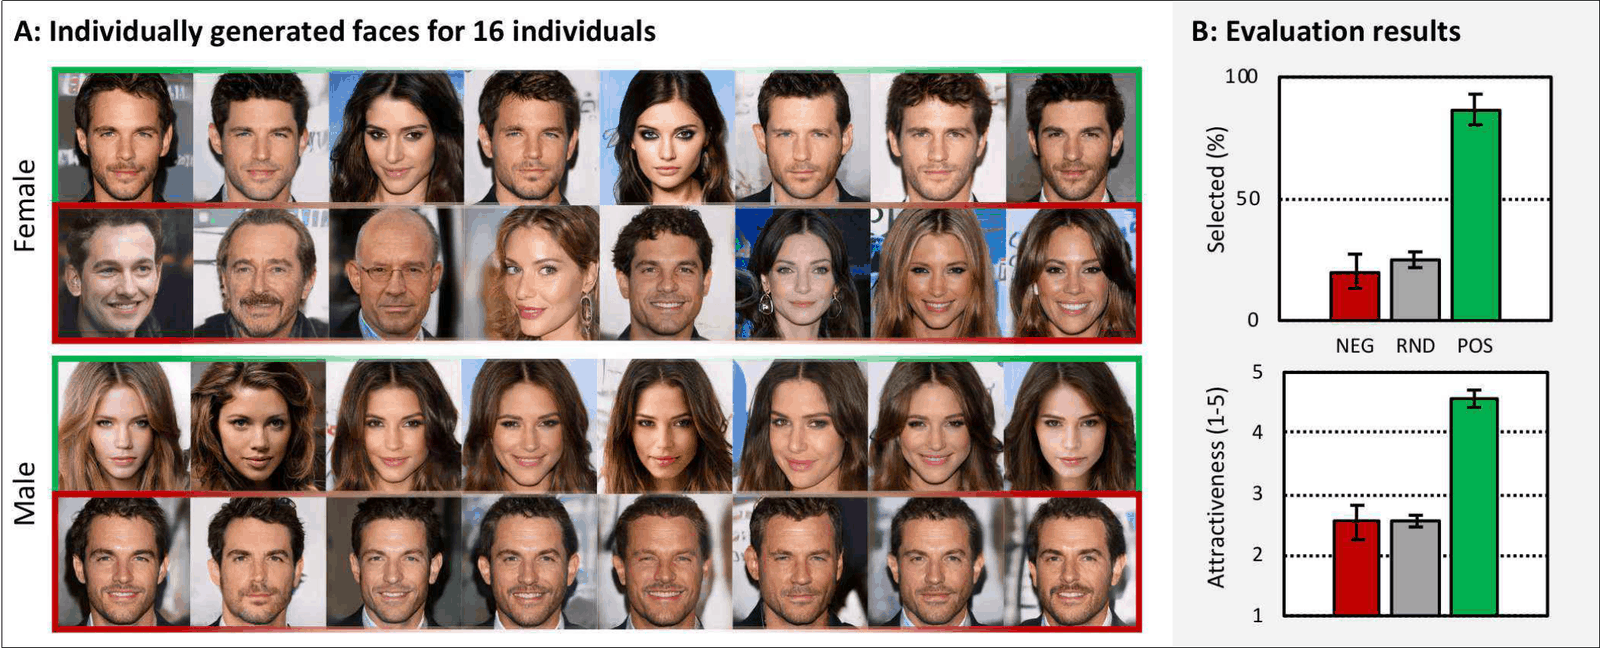 Figure 5: Individually generated faces and their evaluation. Panel A shows for 8 female and 8 male participants (full overview available here) the individual faces expected to be evaluated positively (in green framing) and negatively (in red). Panel B shows the evaluation results averaged across participants for both the free selection (upper-right) and explicit evaluation (lower-right) tasks. In the free selection task, the images that were expected to be found attractive (POS) and unattractive (NEG) were randomly inserted with 20 matched controls (RND = random expected attractiveness), and participants made a free selection of attractive faces. In the explicit evaluation task, participants rated each generated (POS, NEG, RND) image on a Likert-type scale of personal attractiveness